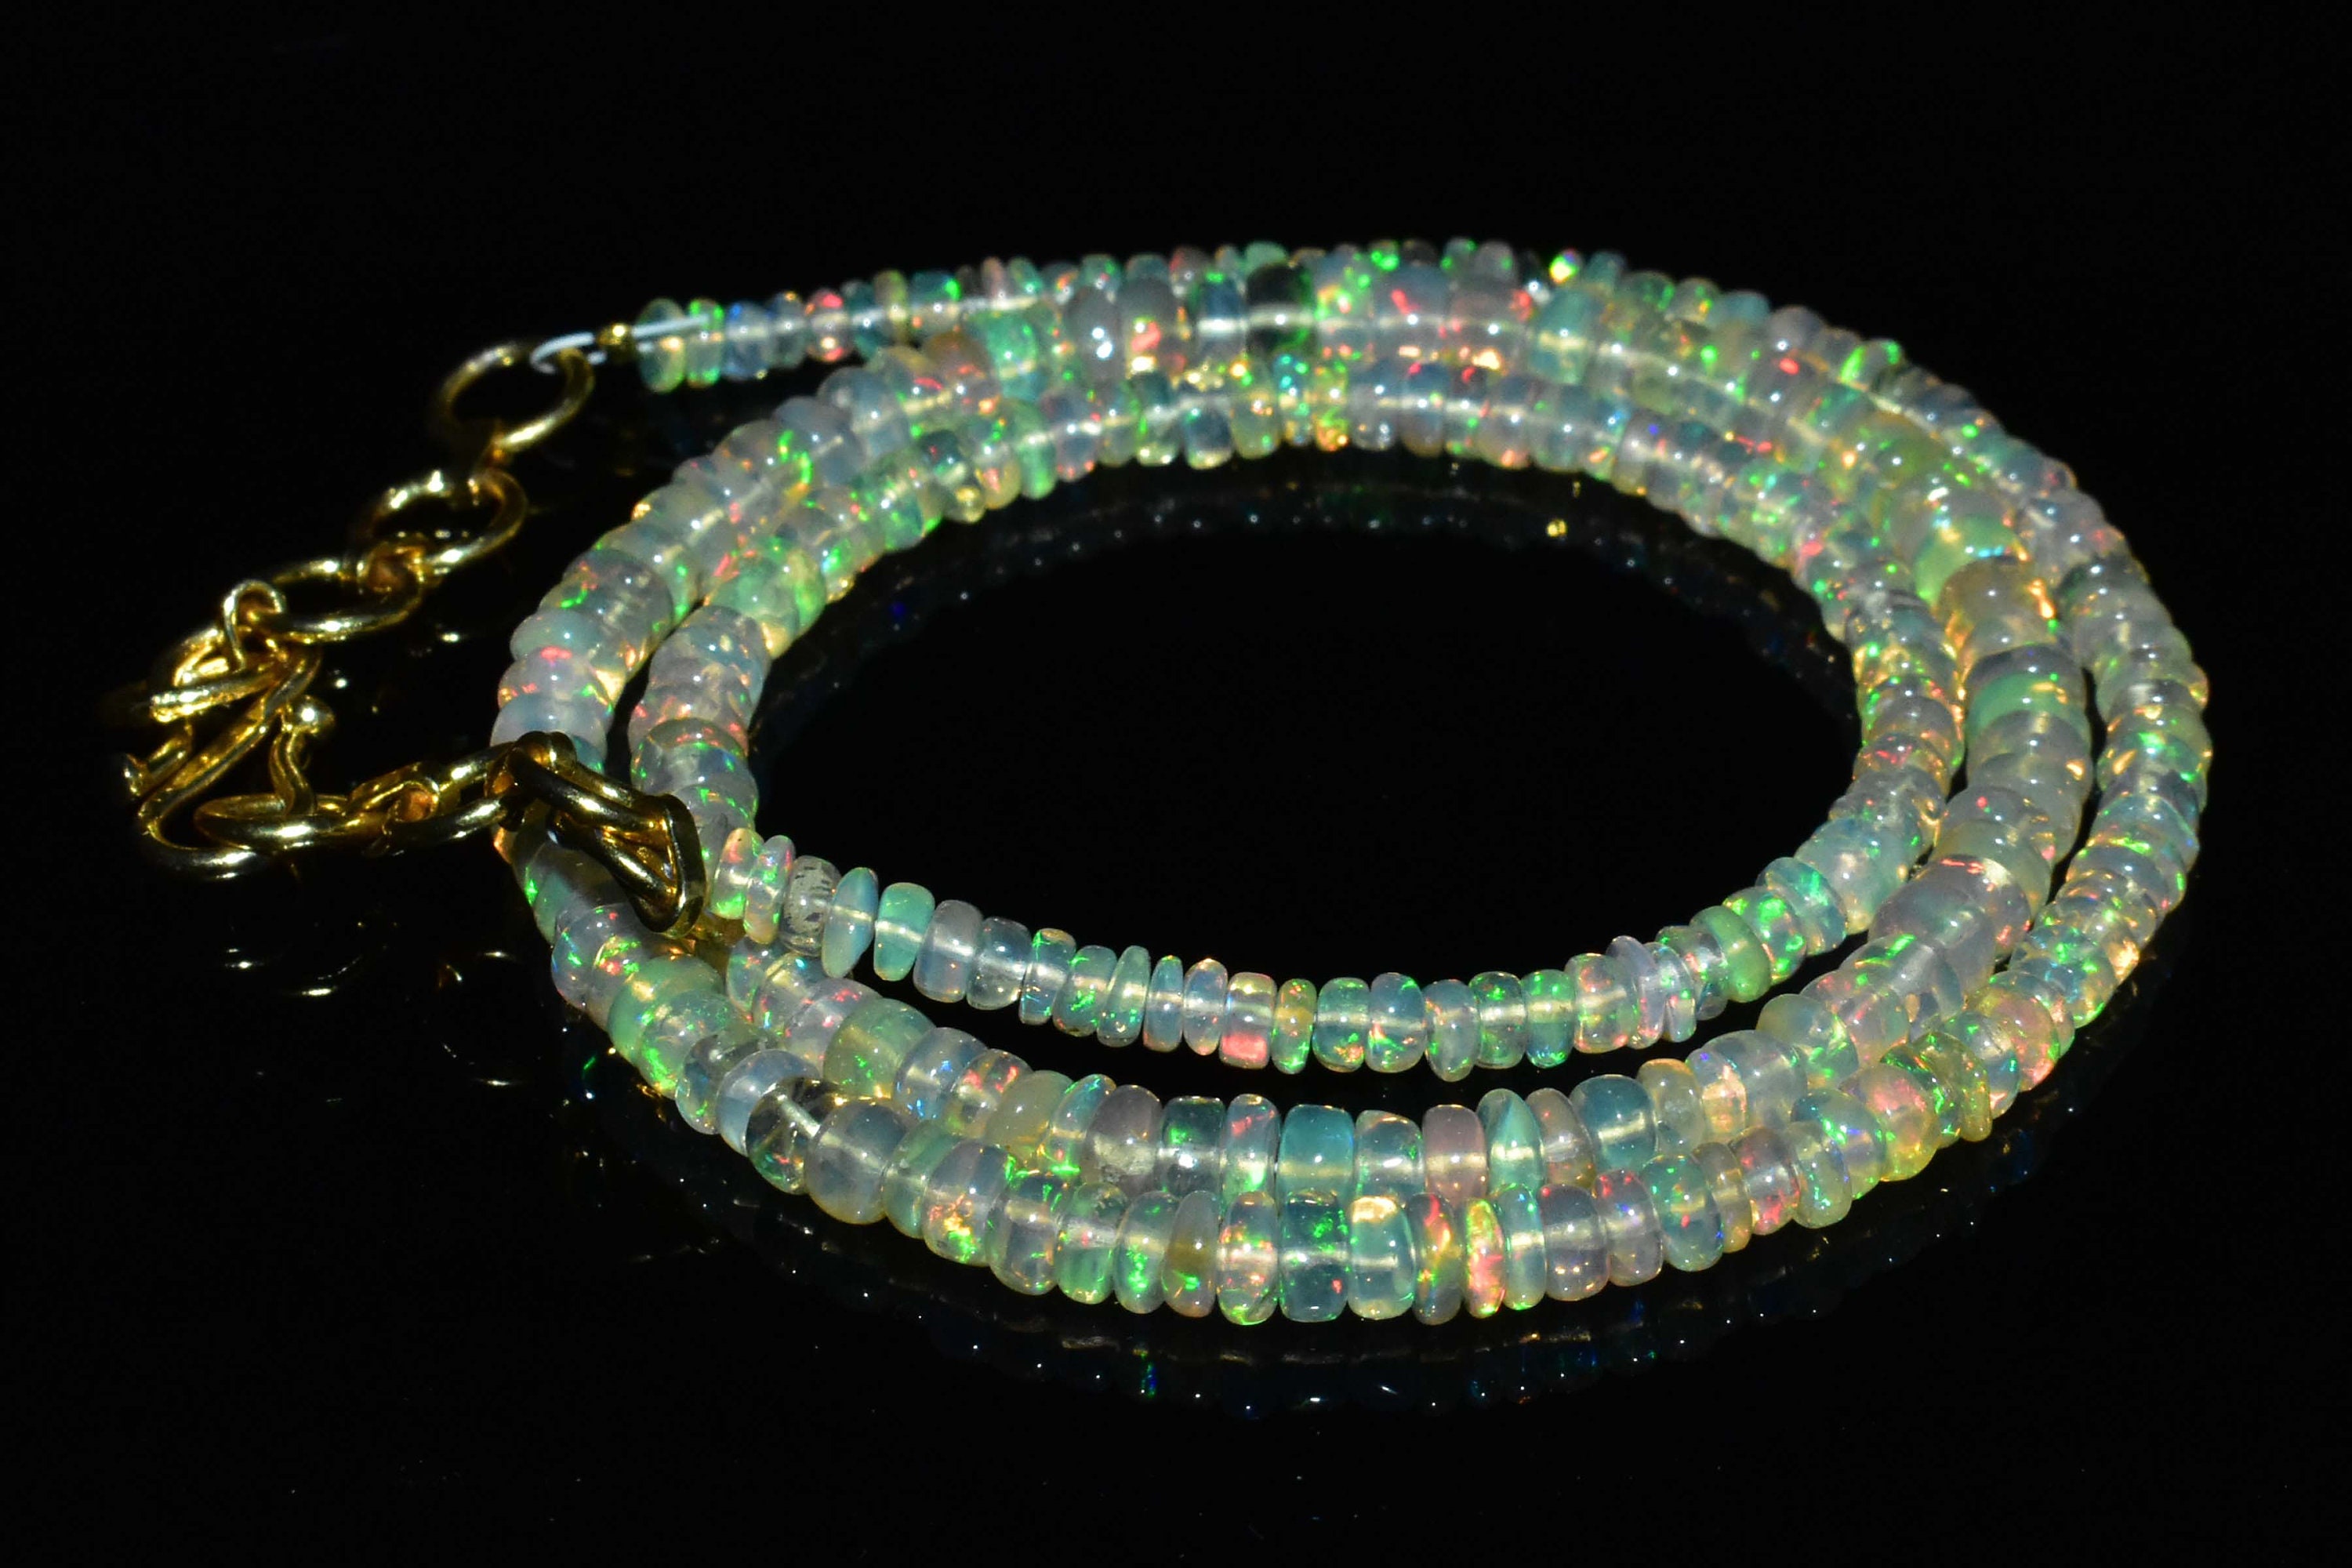 Green Black Opal Smooth Rondelle Beads Green Black Opal Beads